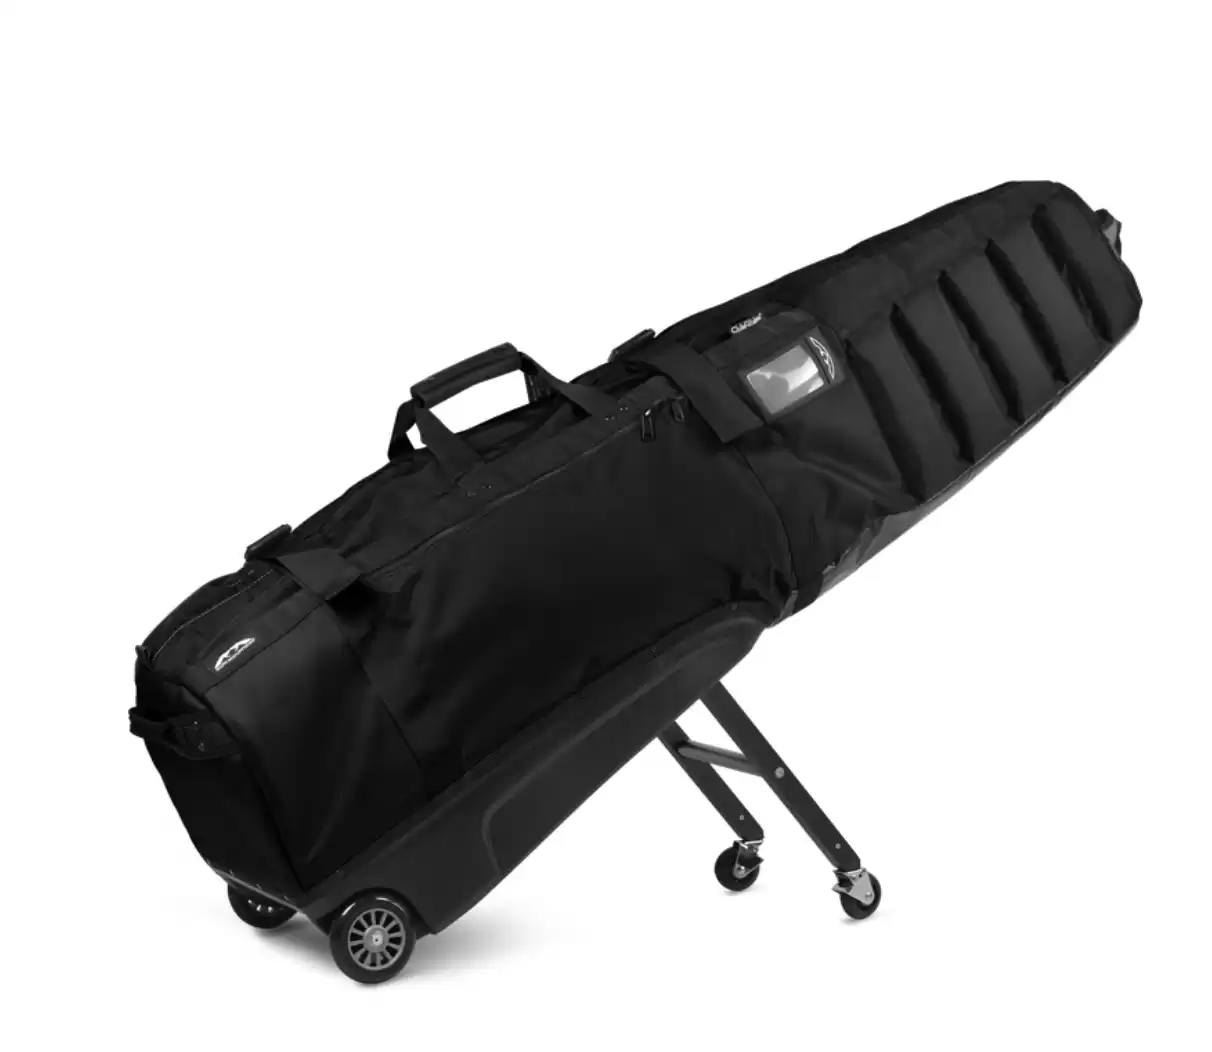 Sun Mountain ClubGlider Meridian Travel Cover | PGA TOUR Superstore